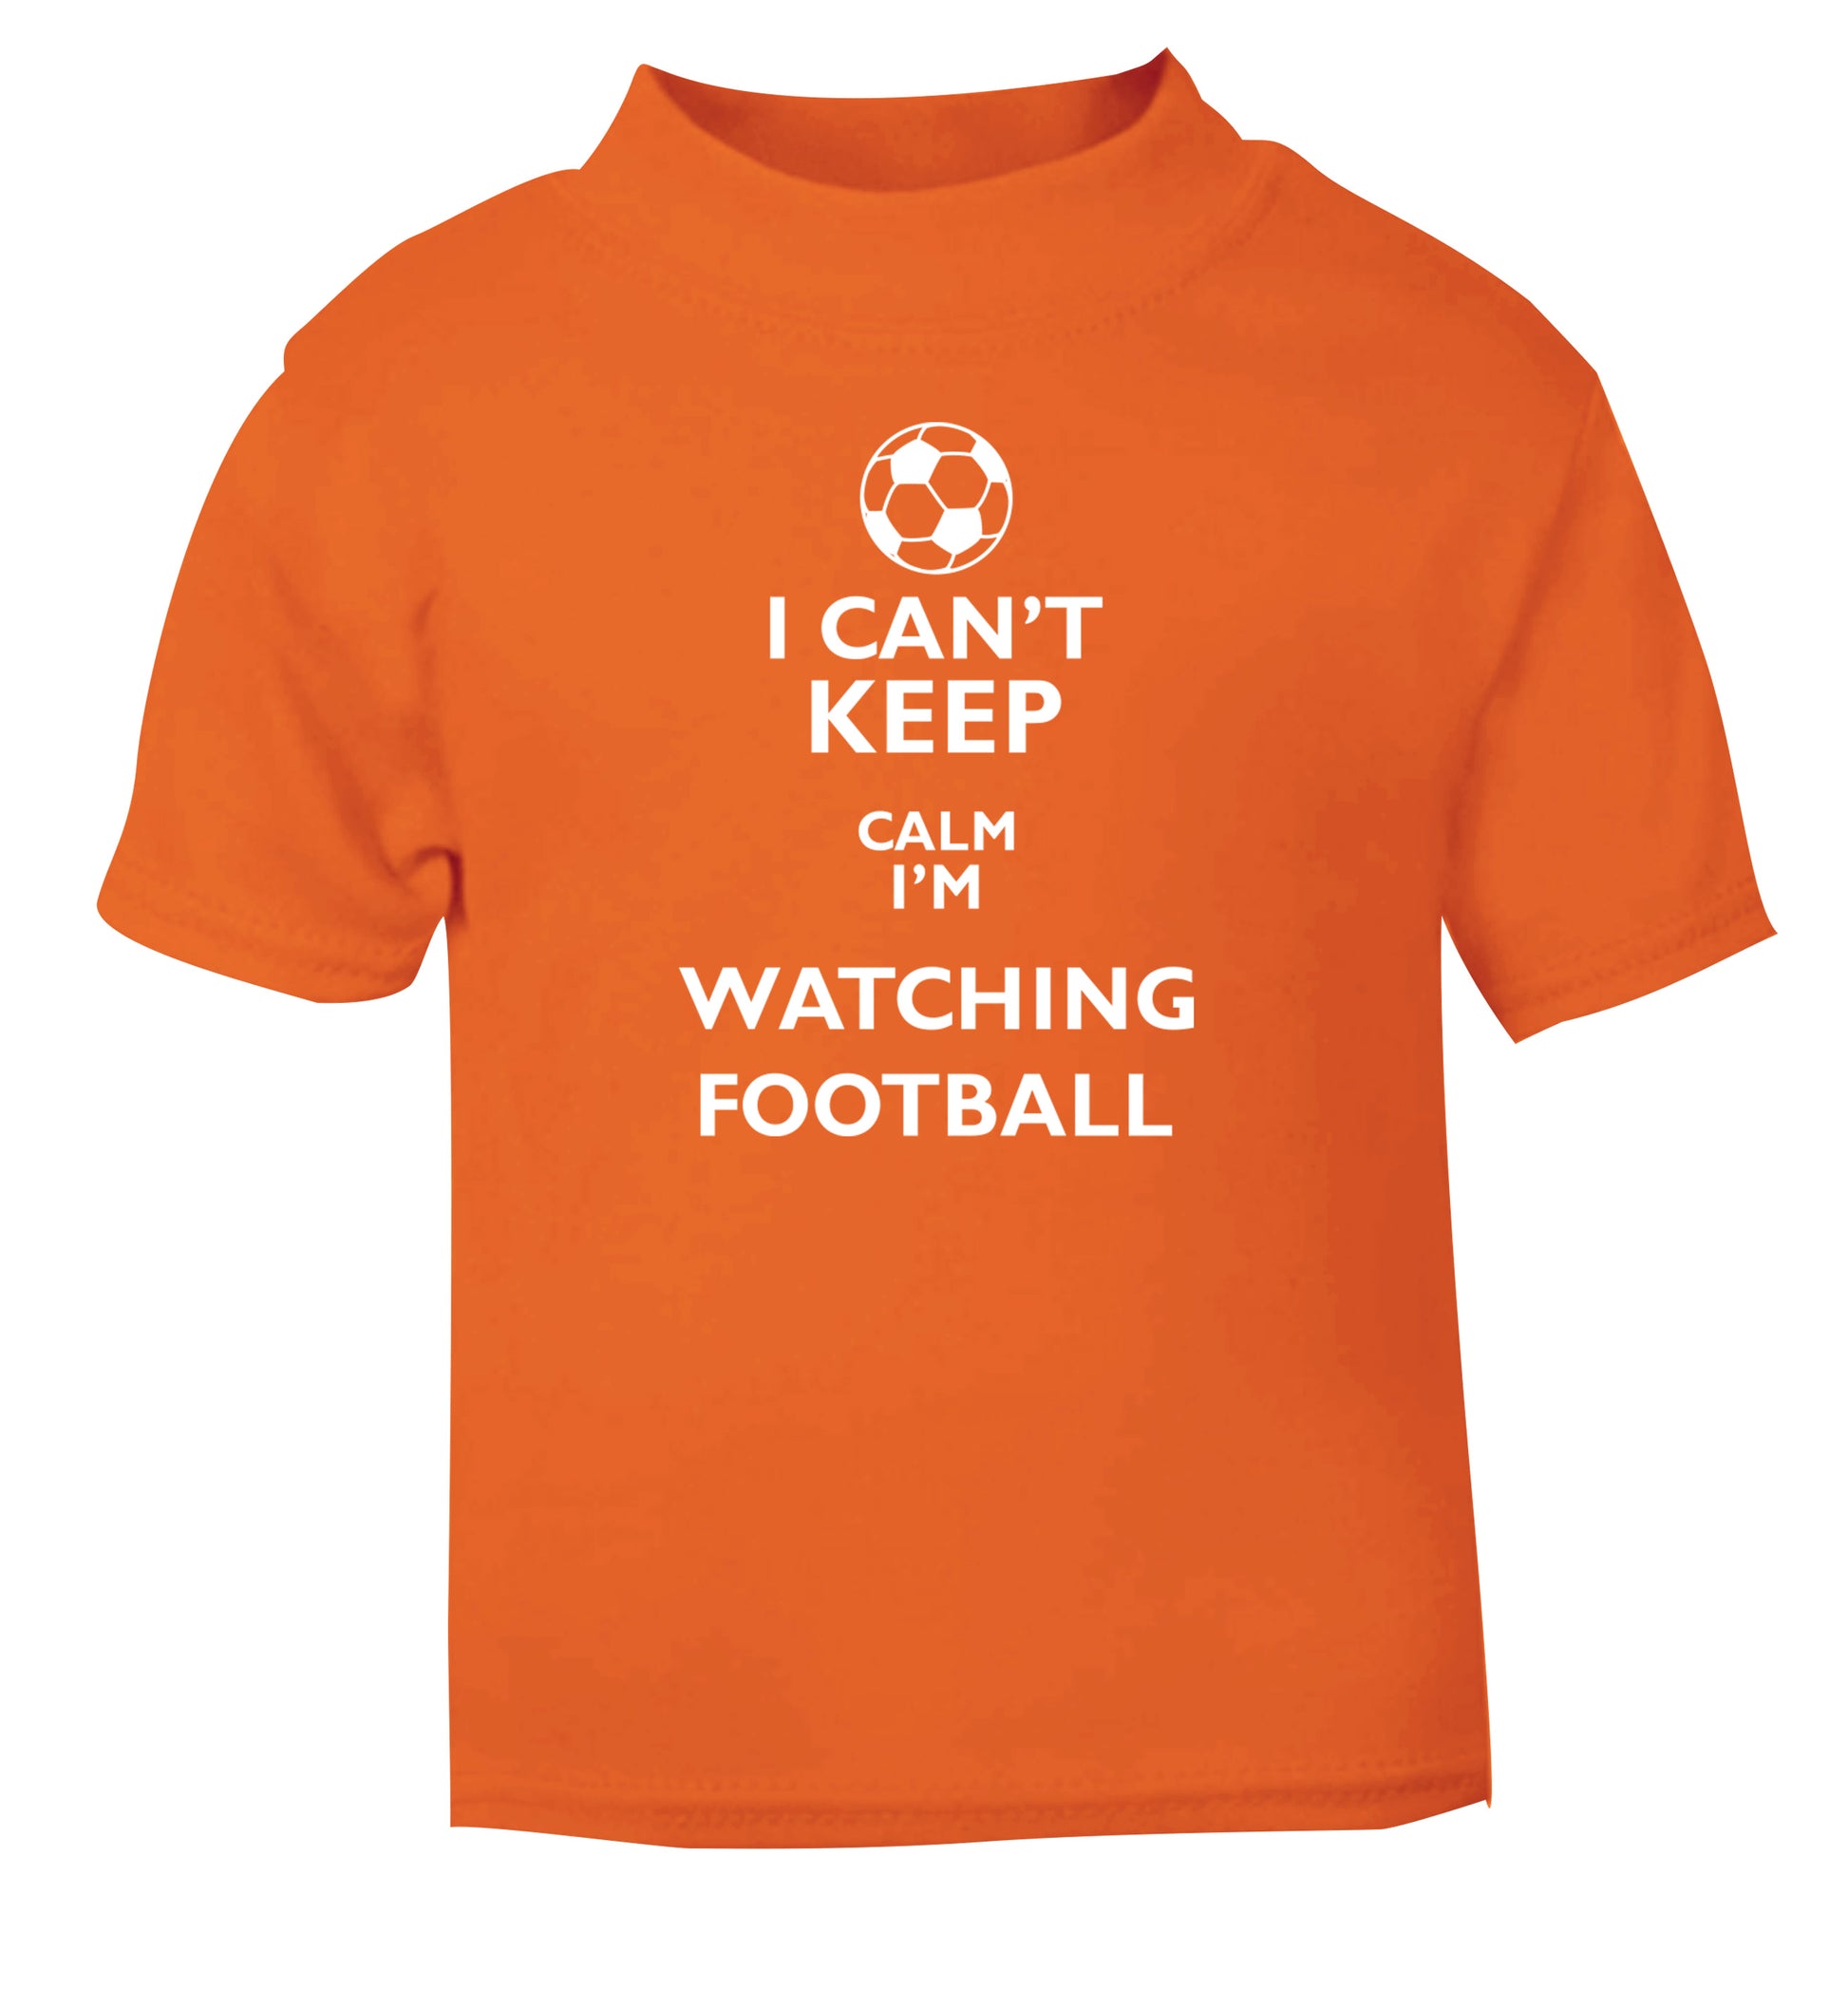 I can't keep calm I'm watching the football orange Baby Toddler Tshirt 2 Years